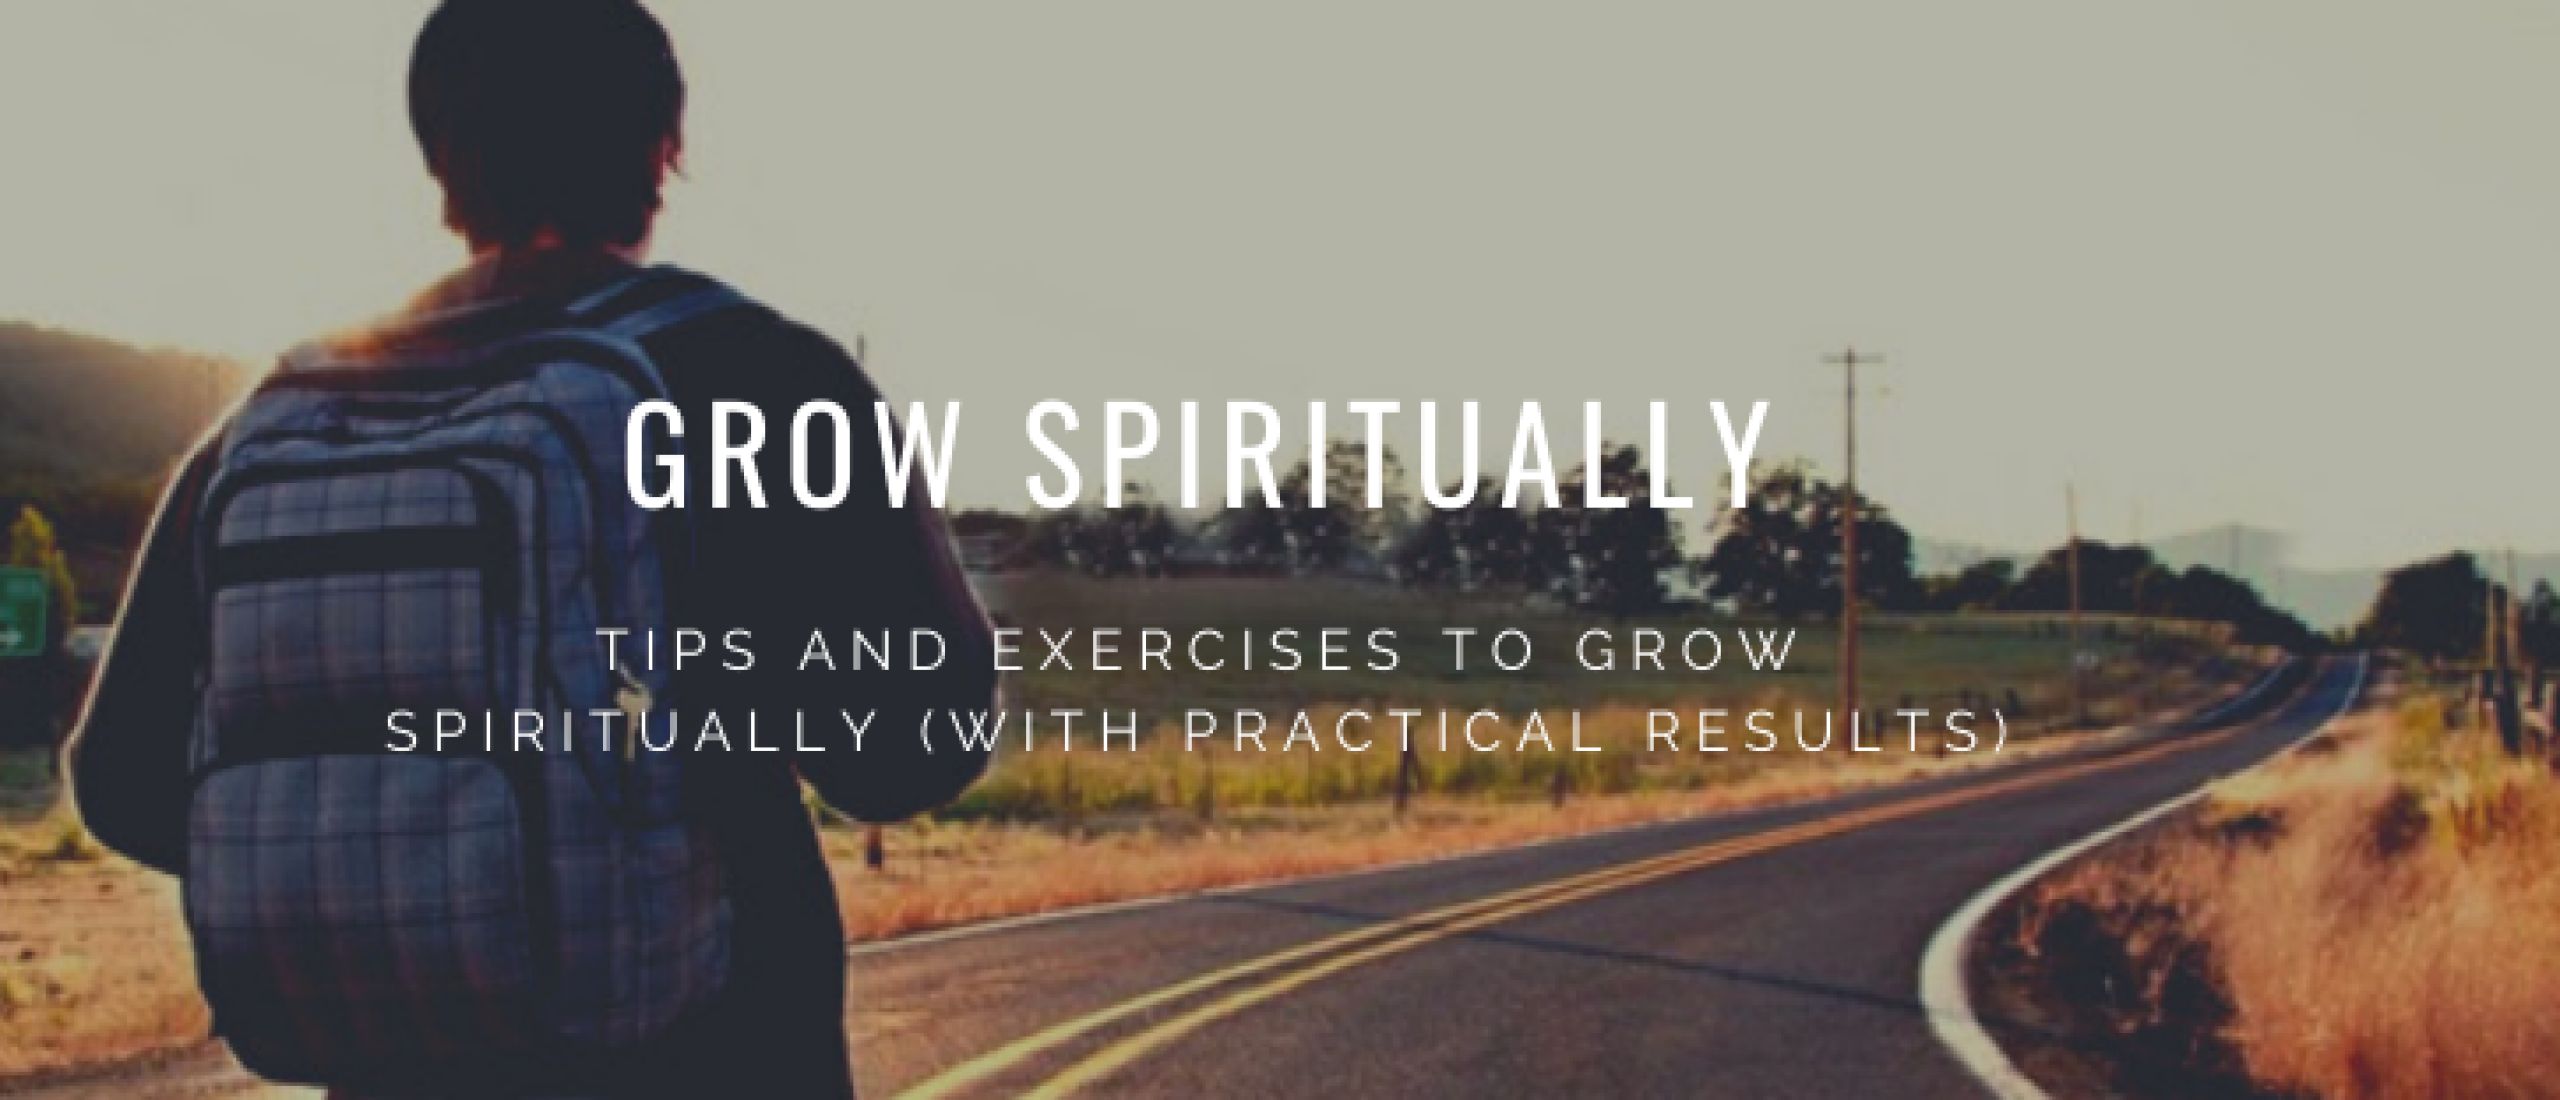 How to grow spiritually? 9 Practices and Tips